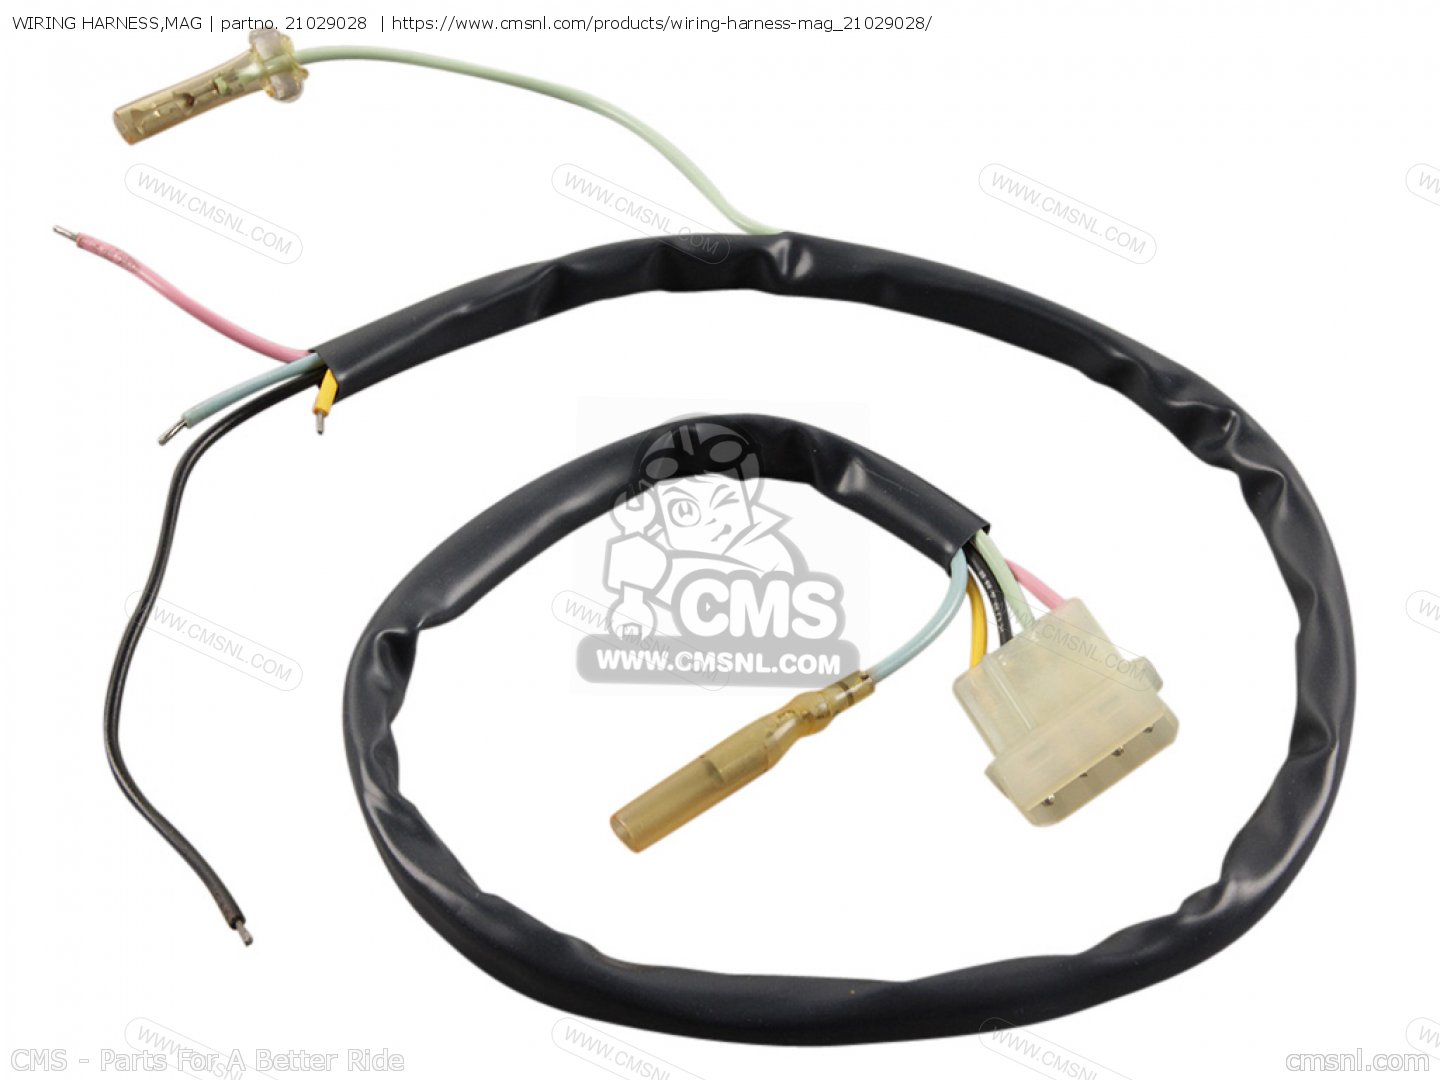 WIRING HARNESS,MAG for KH100B7 1976 CANADA - order at CMSNL